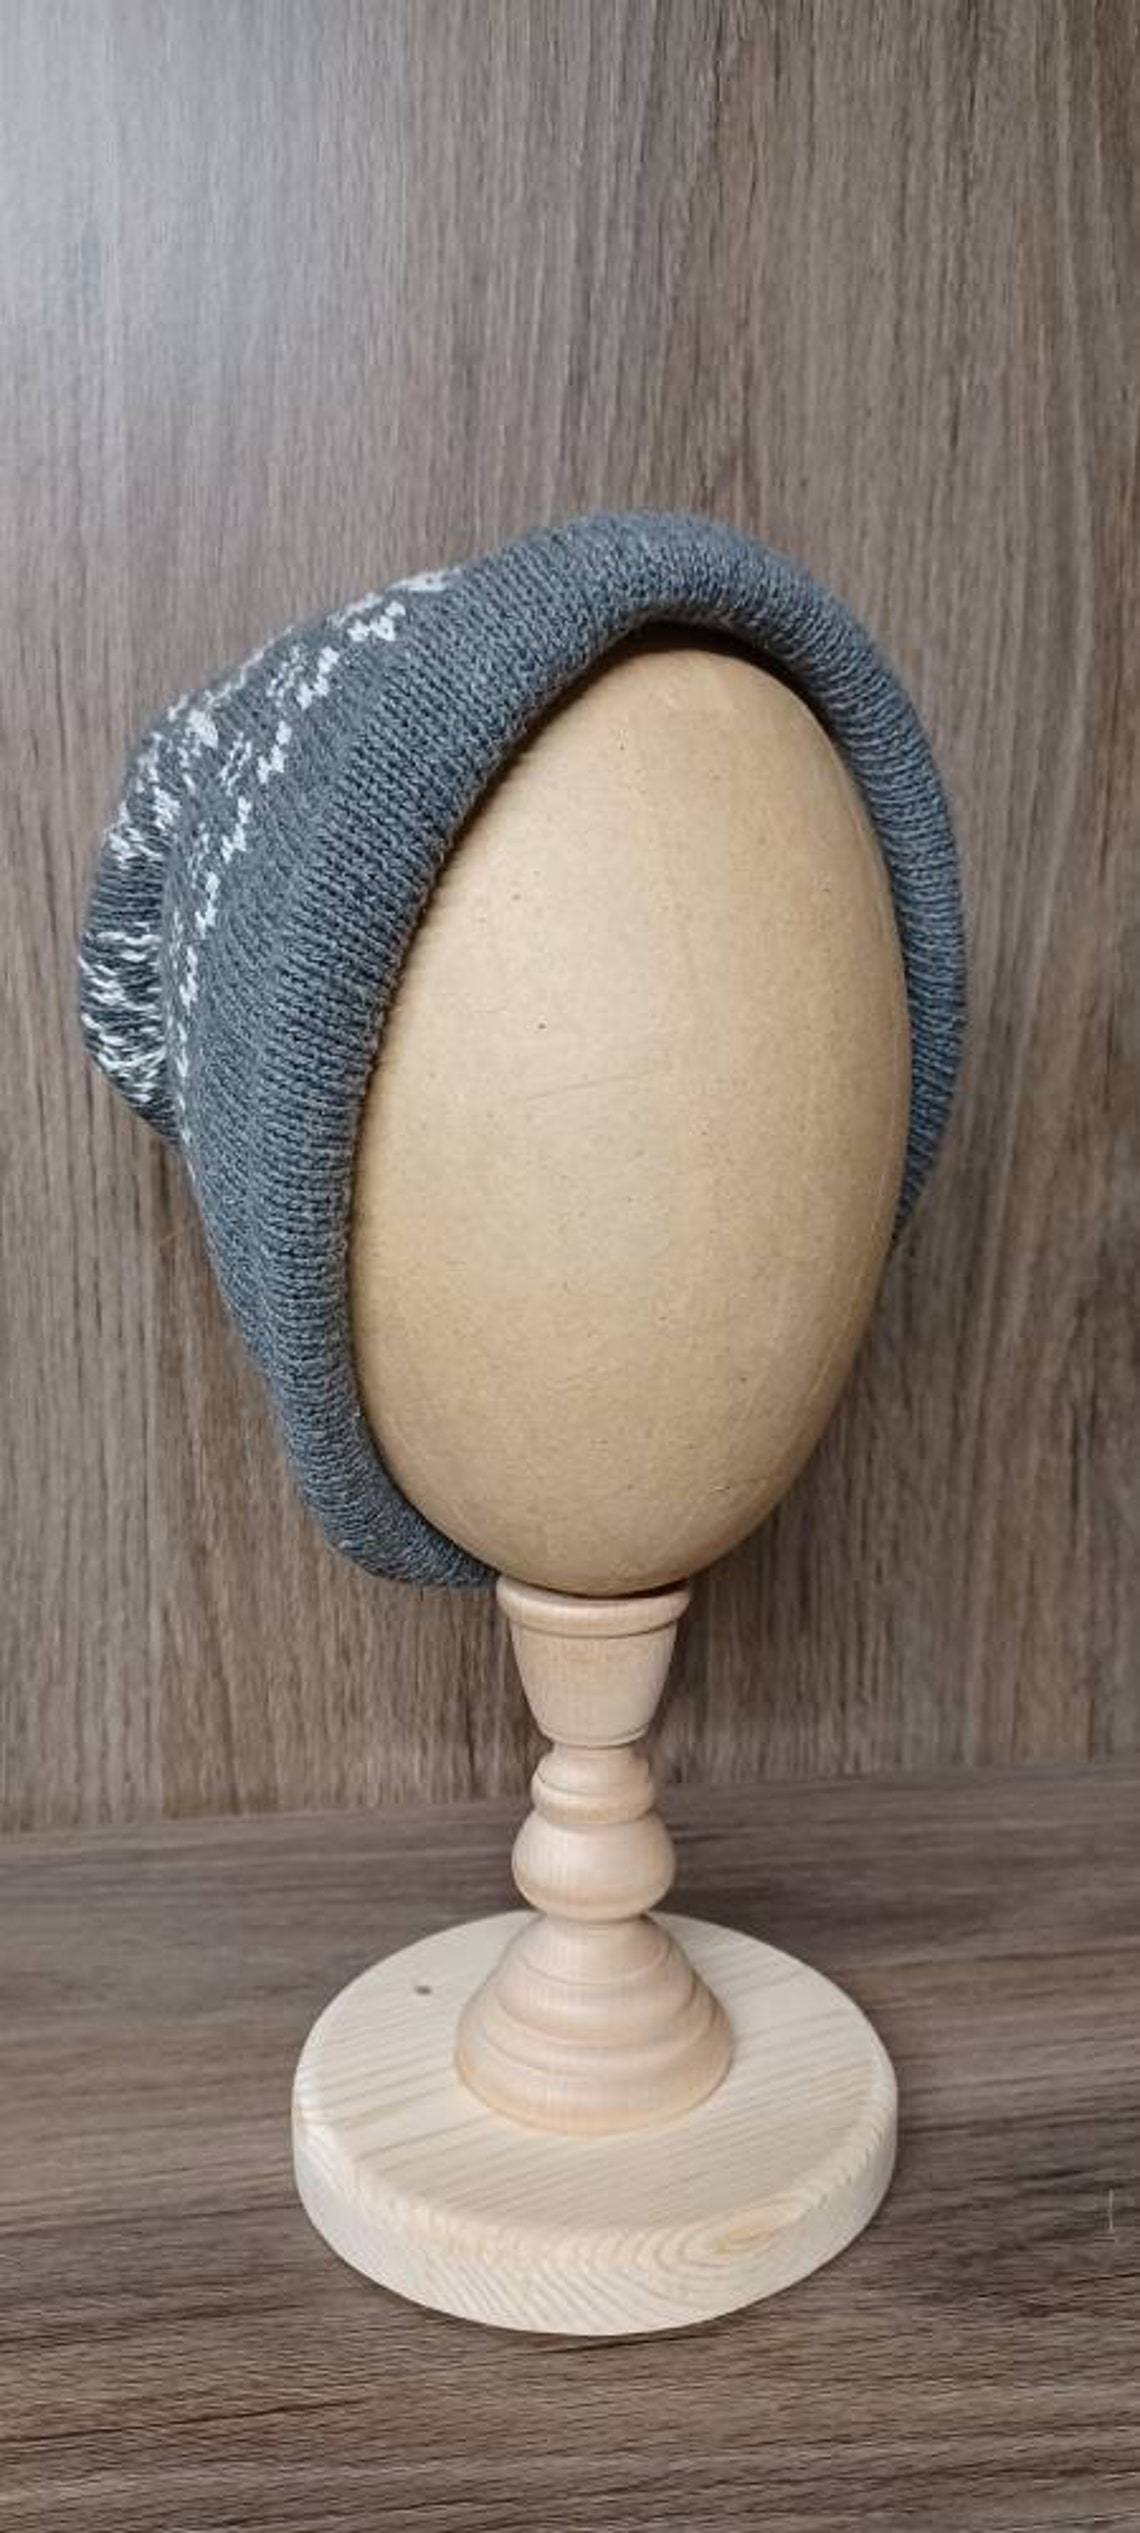 New Adult Mannequin Head Display Great for Crochet Beanie | Etsy